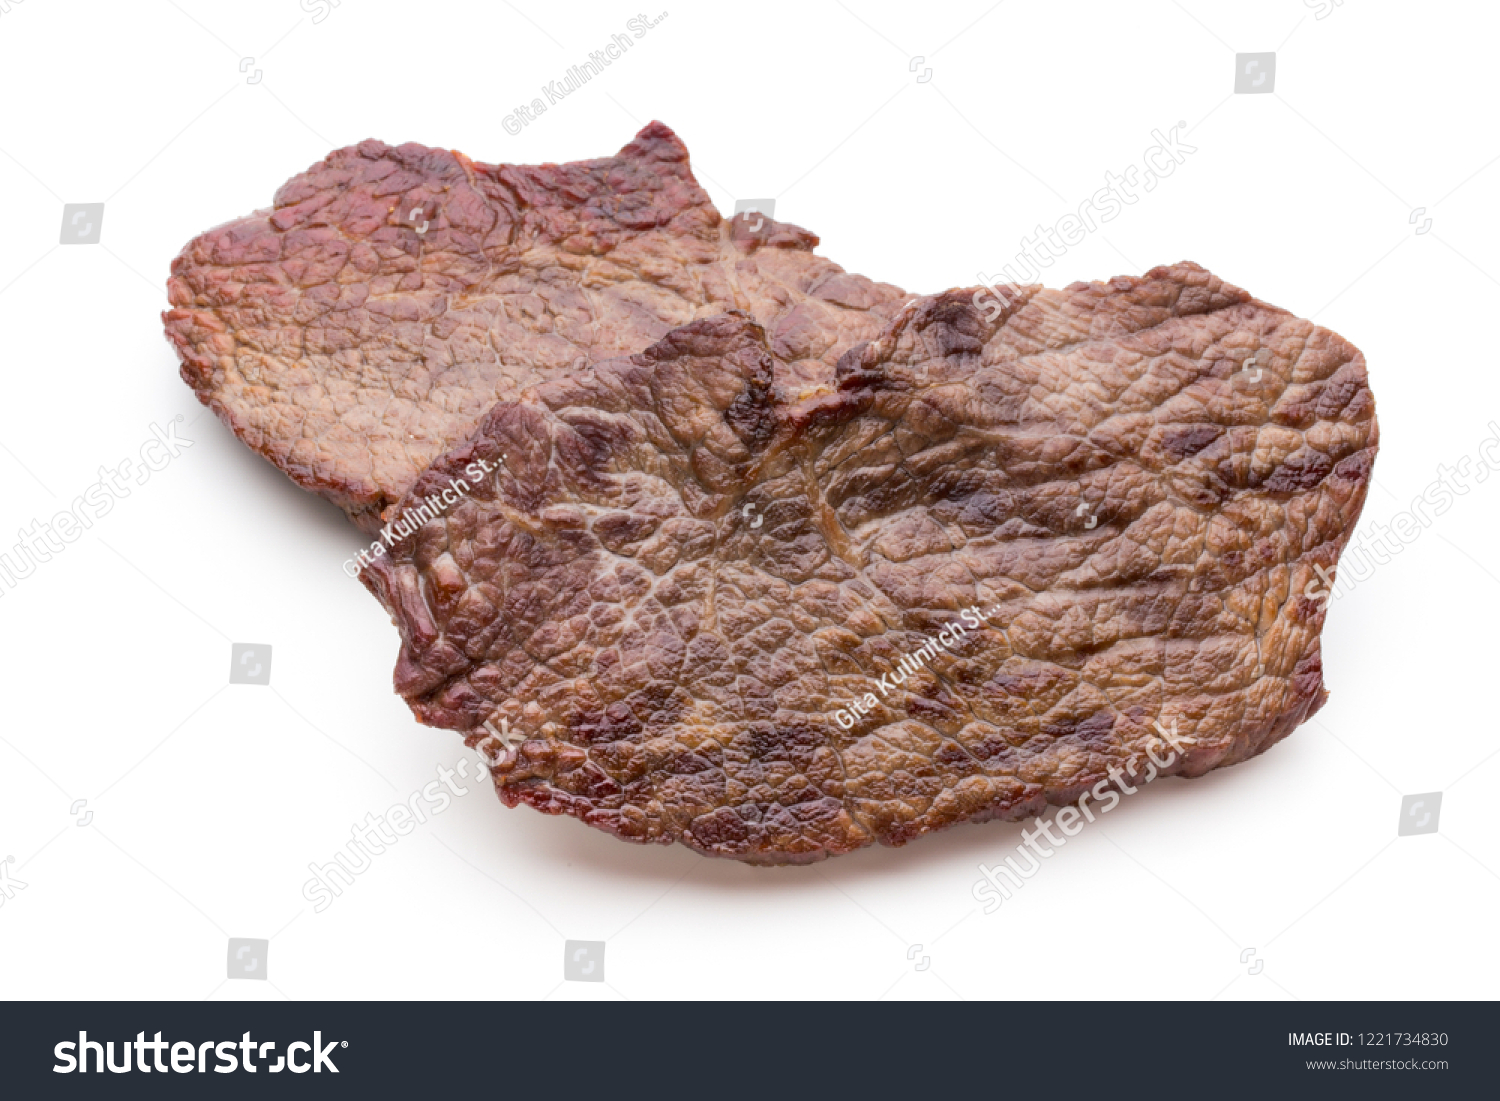 Grilled bio beef steaks with spices isolated on white background. #1221734830